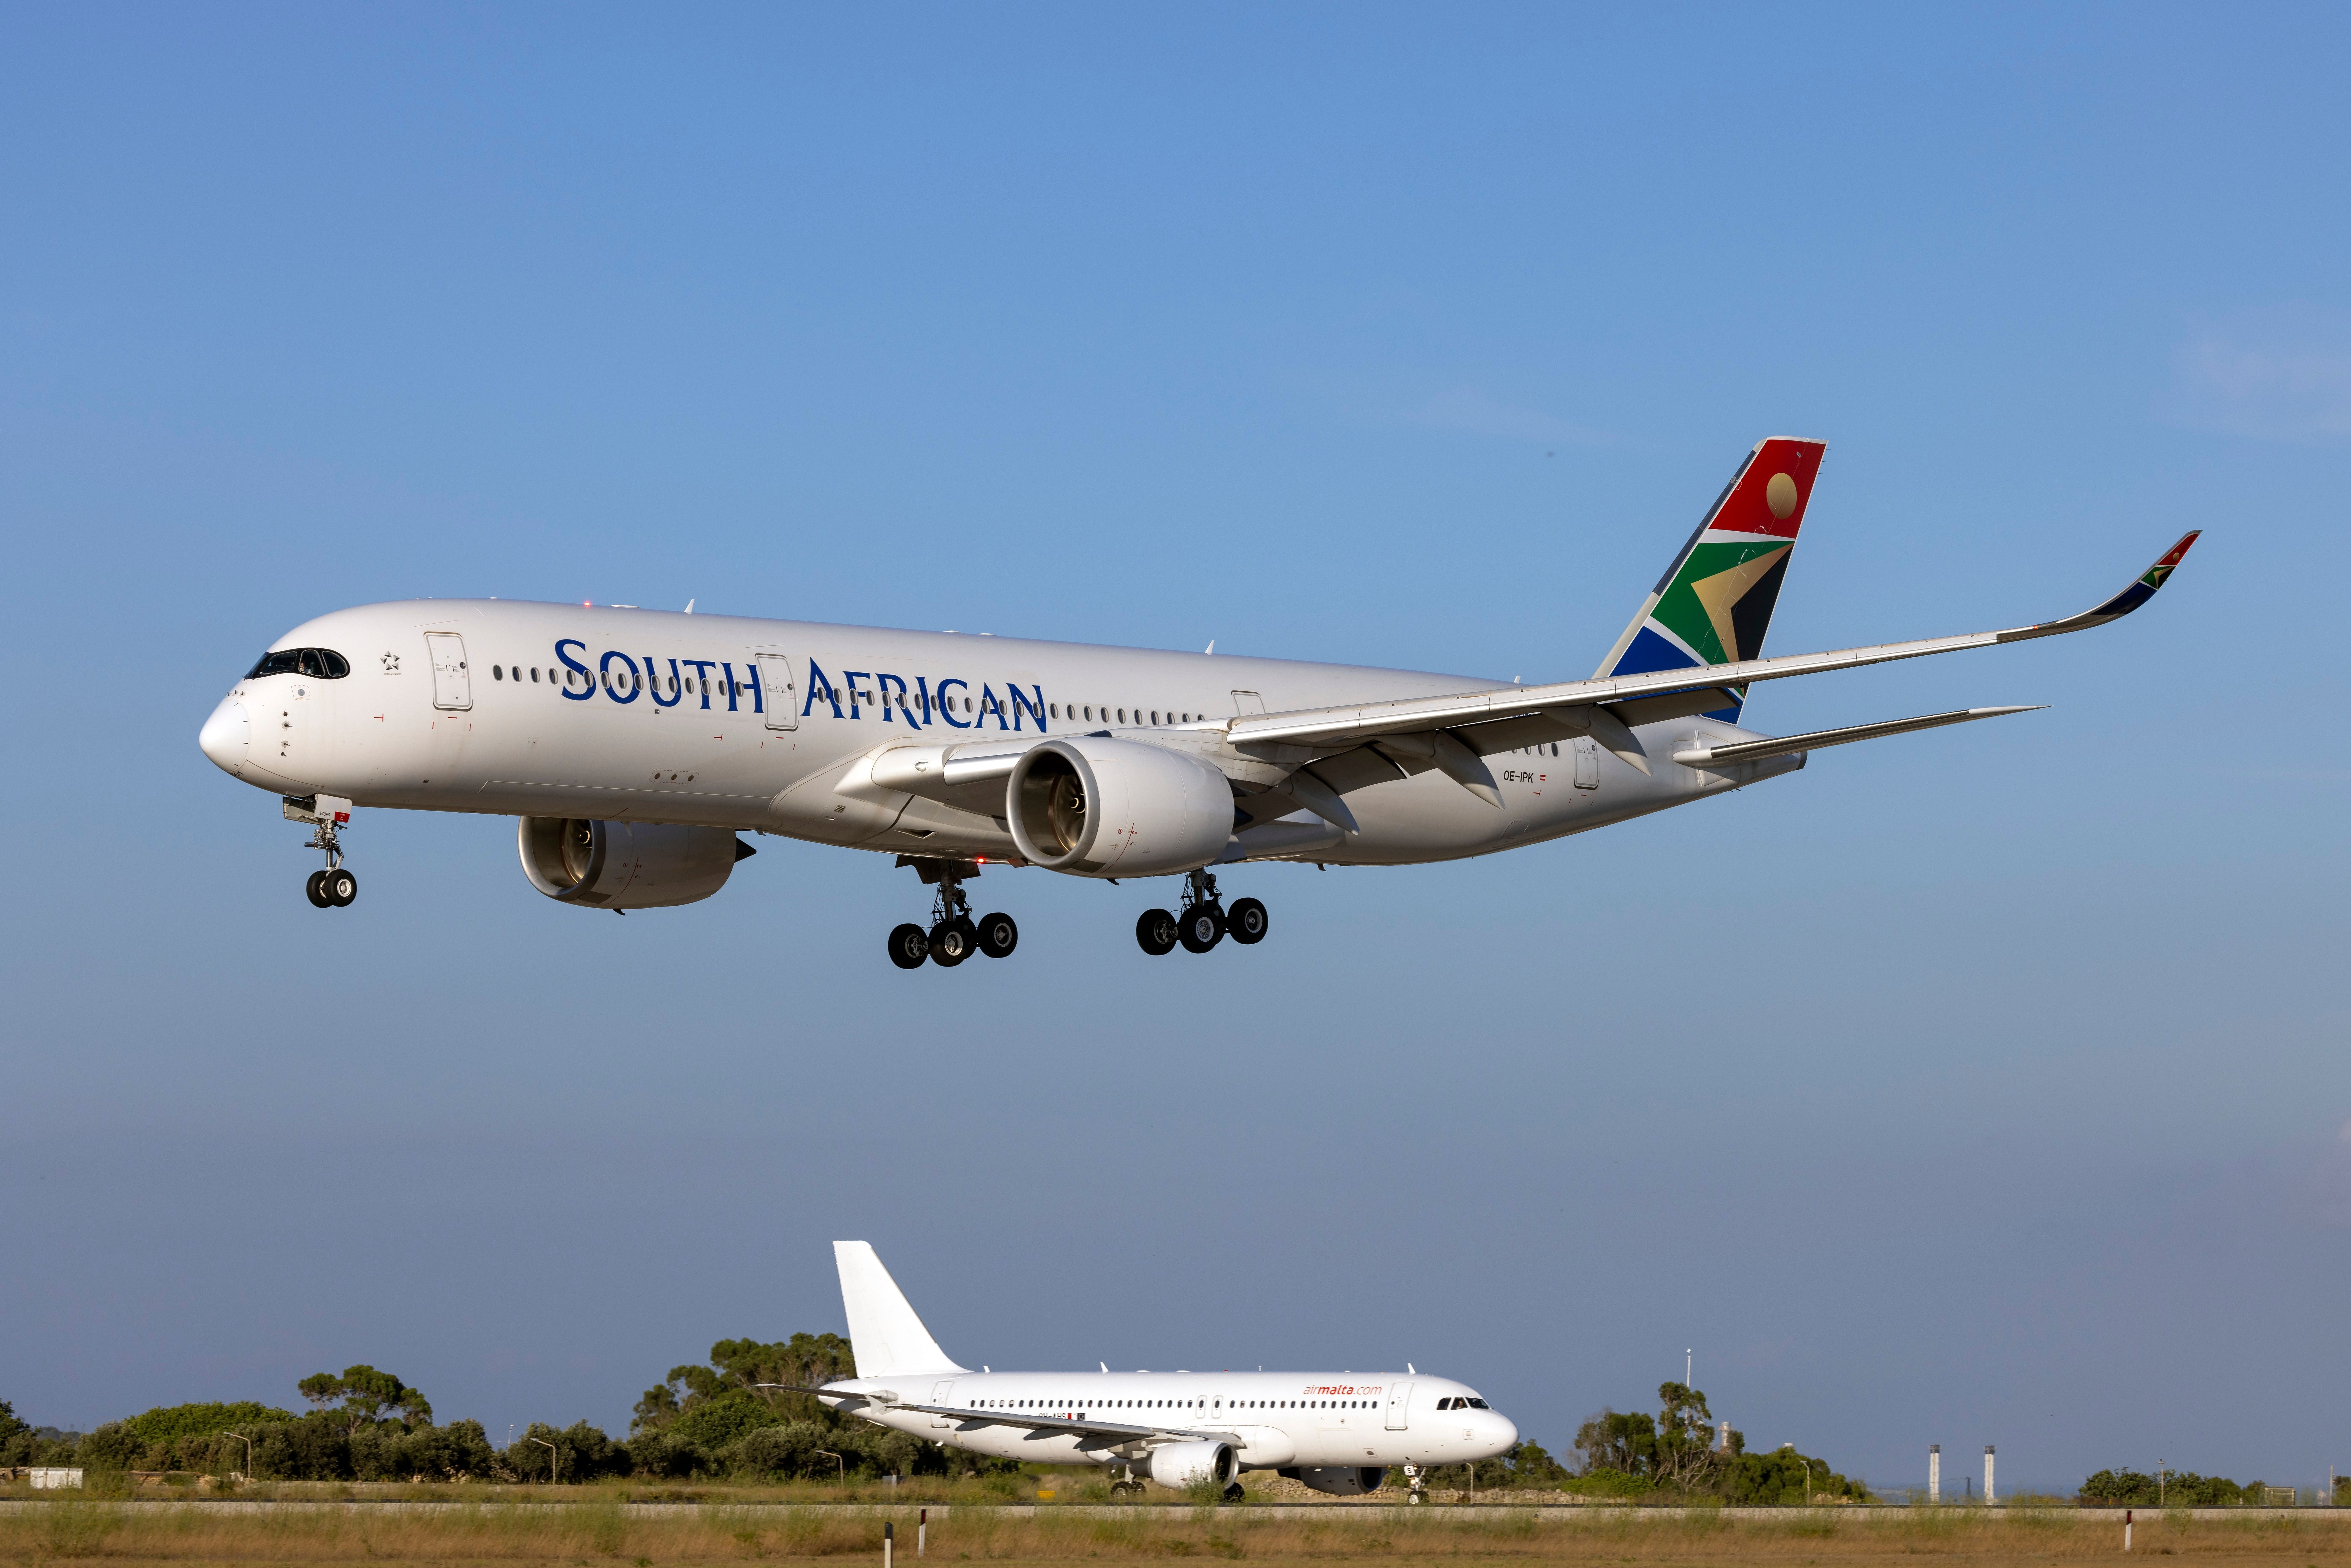 A South African Airways Airbus A350 Landing In Malta.